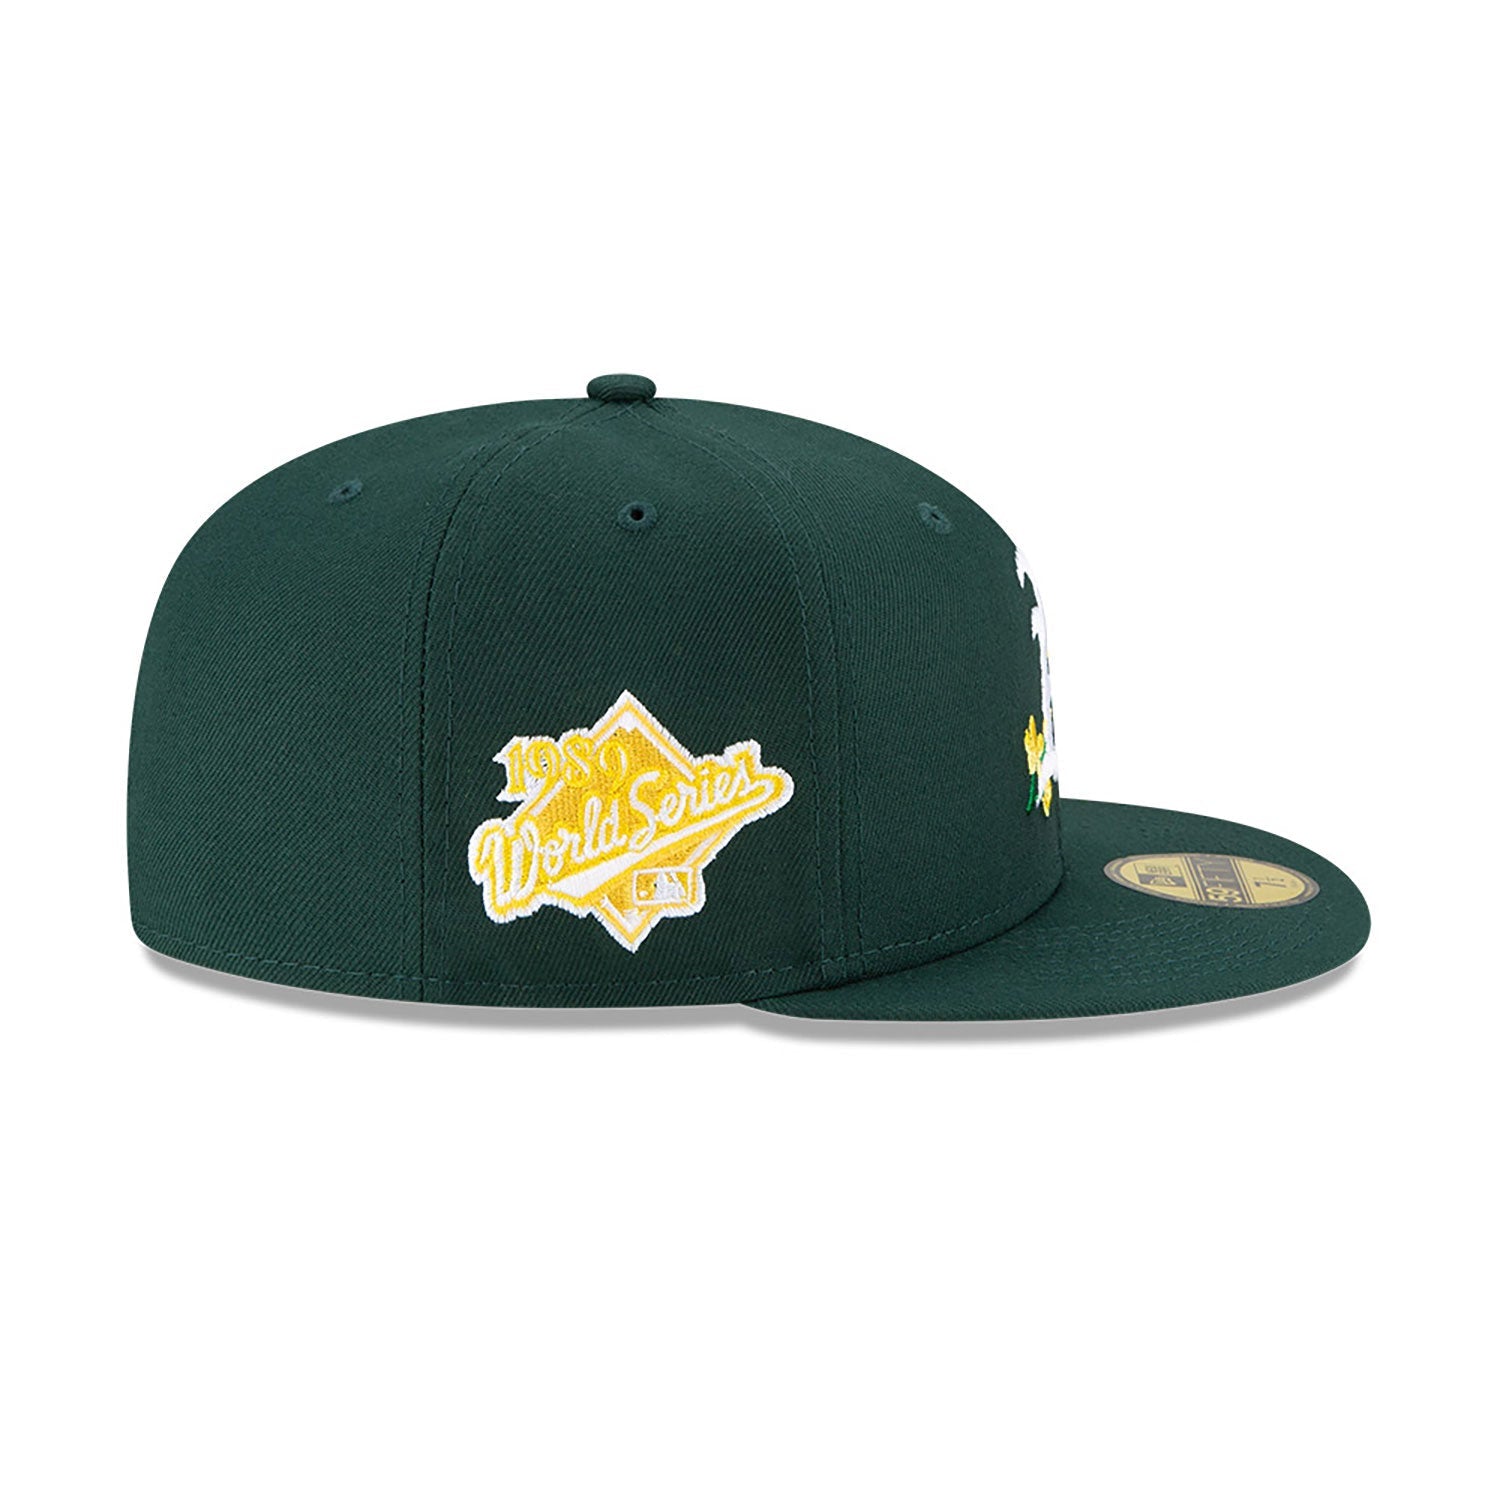 1980’s Oakland Athletics New Era Fitted hat, - 8/10